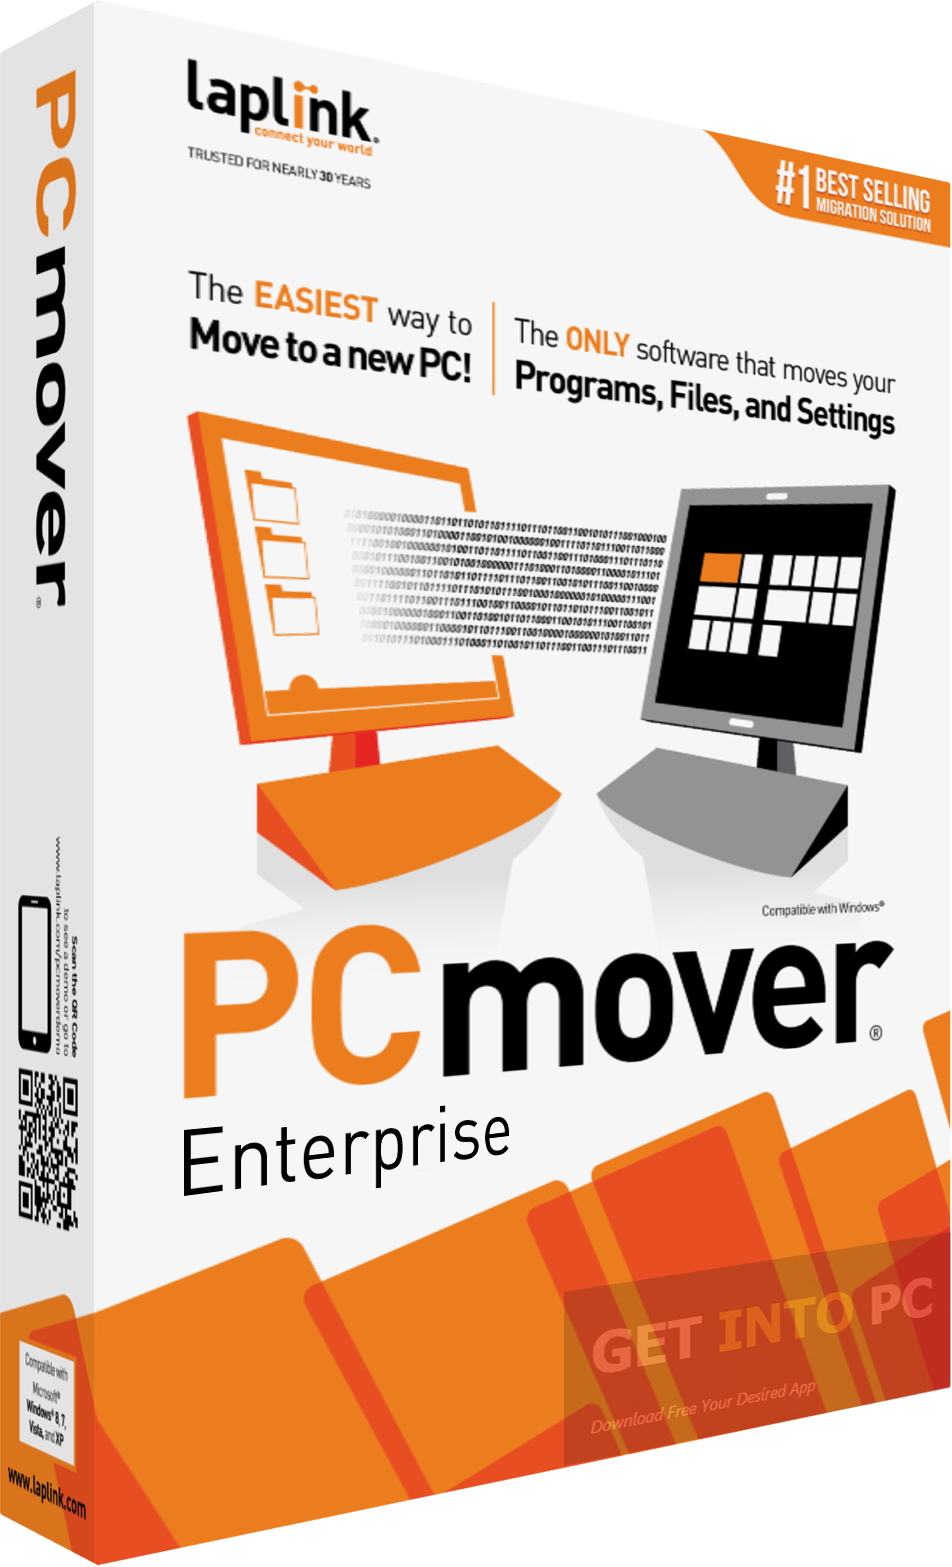 pcmover software free download